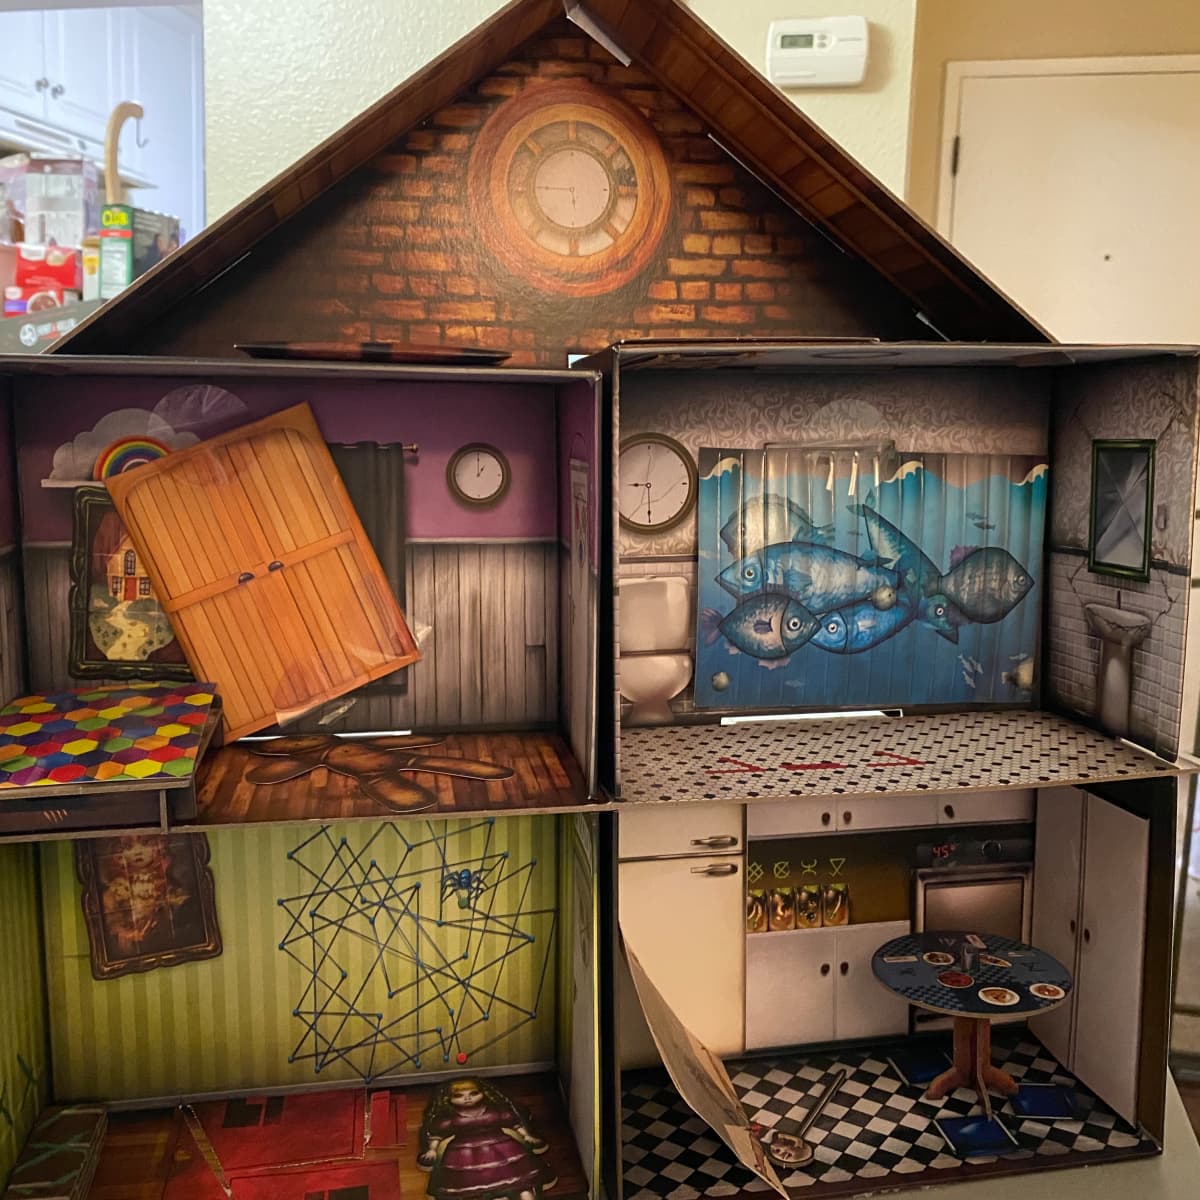 No-Spoiler Review of Escape the Room: The Cursed Dollhouse - HobbyLark